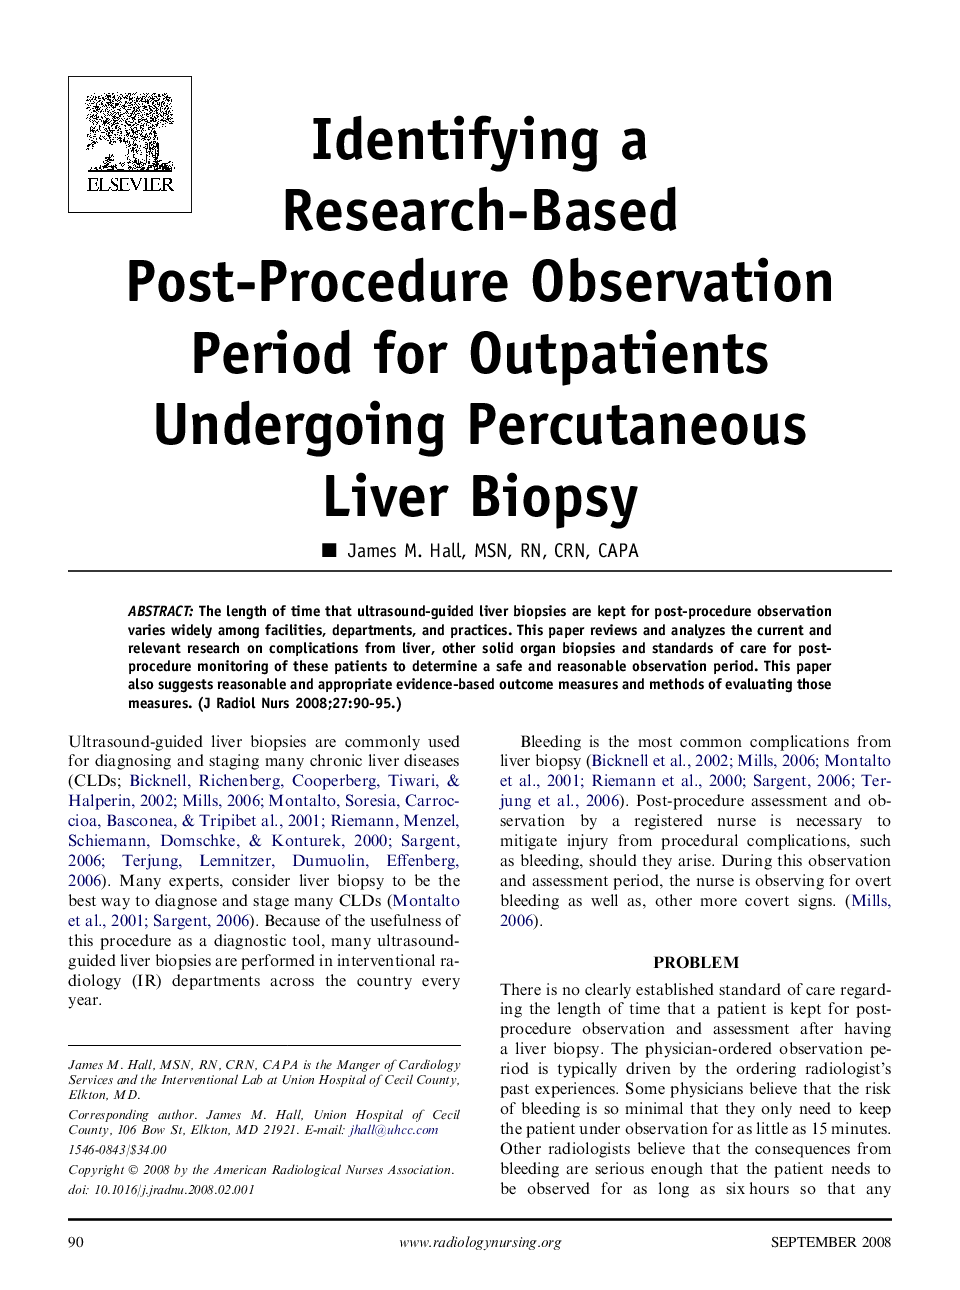 Identifying a Research-Based Post-Procedure Observation Period for Outpatients Undergoing Percutaneous Liver Biopsy